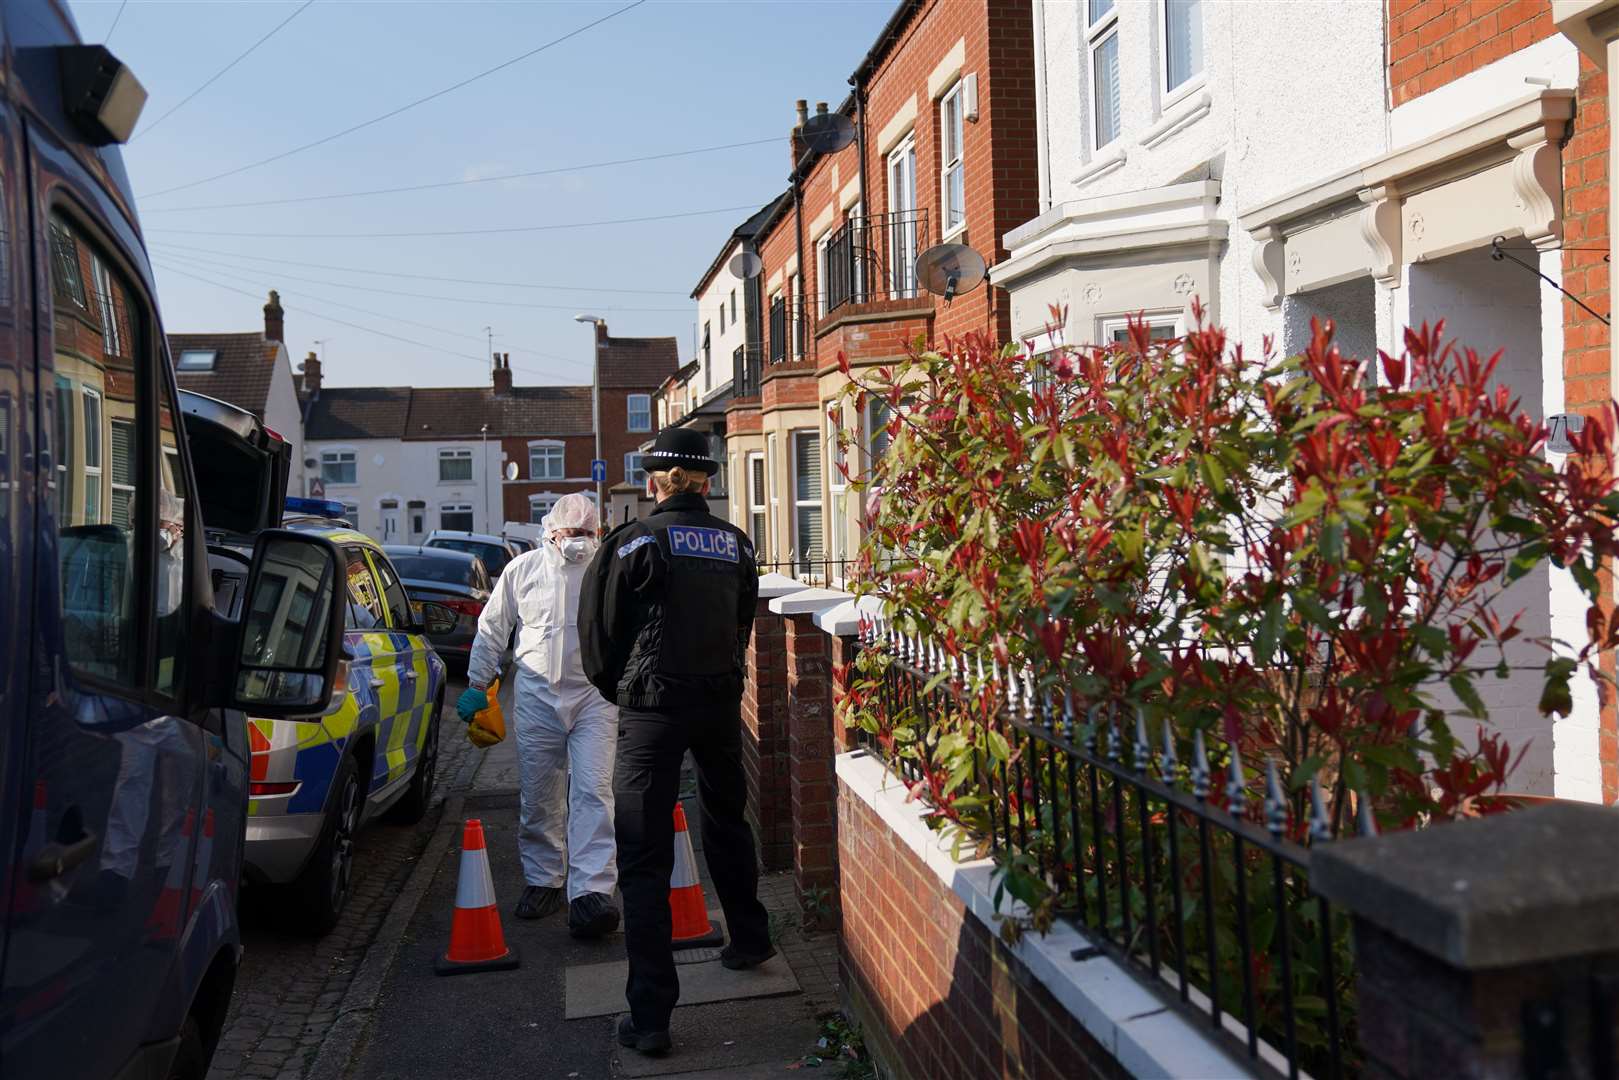 Forensic officers at Beal’s home in March last year (Jacob King/PA)